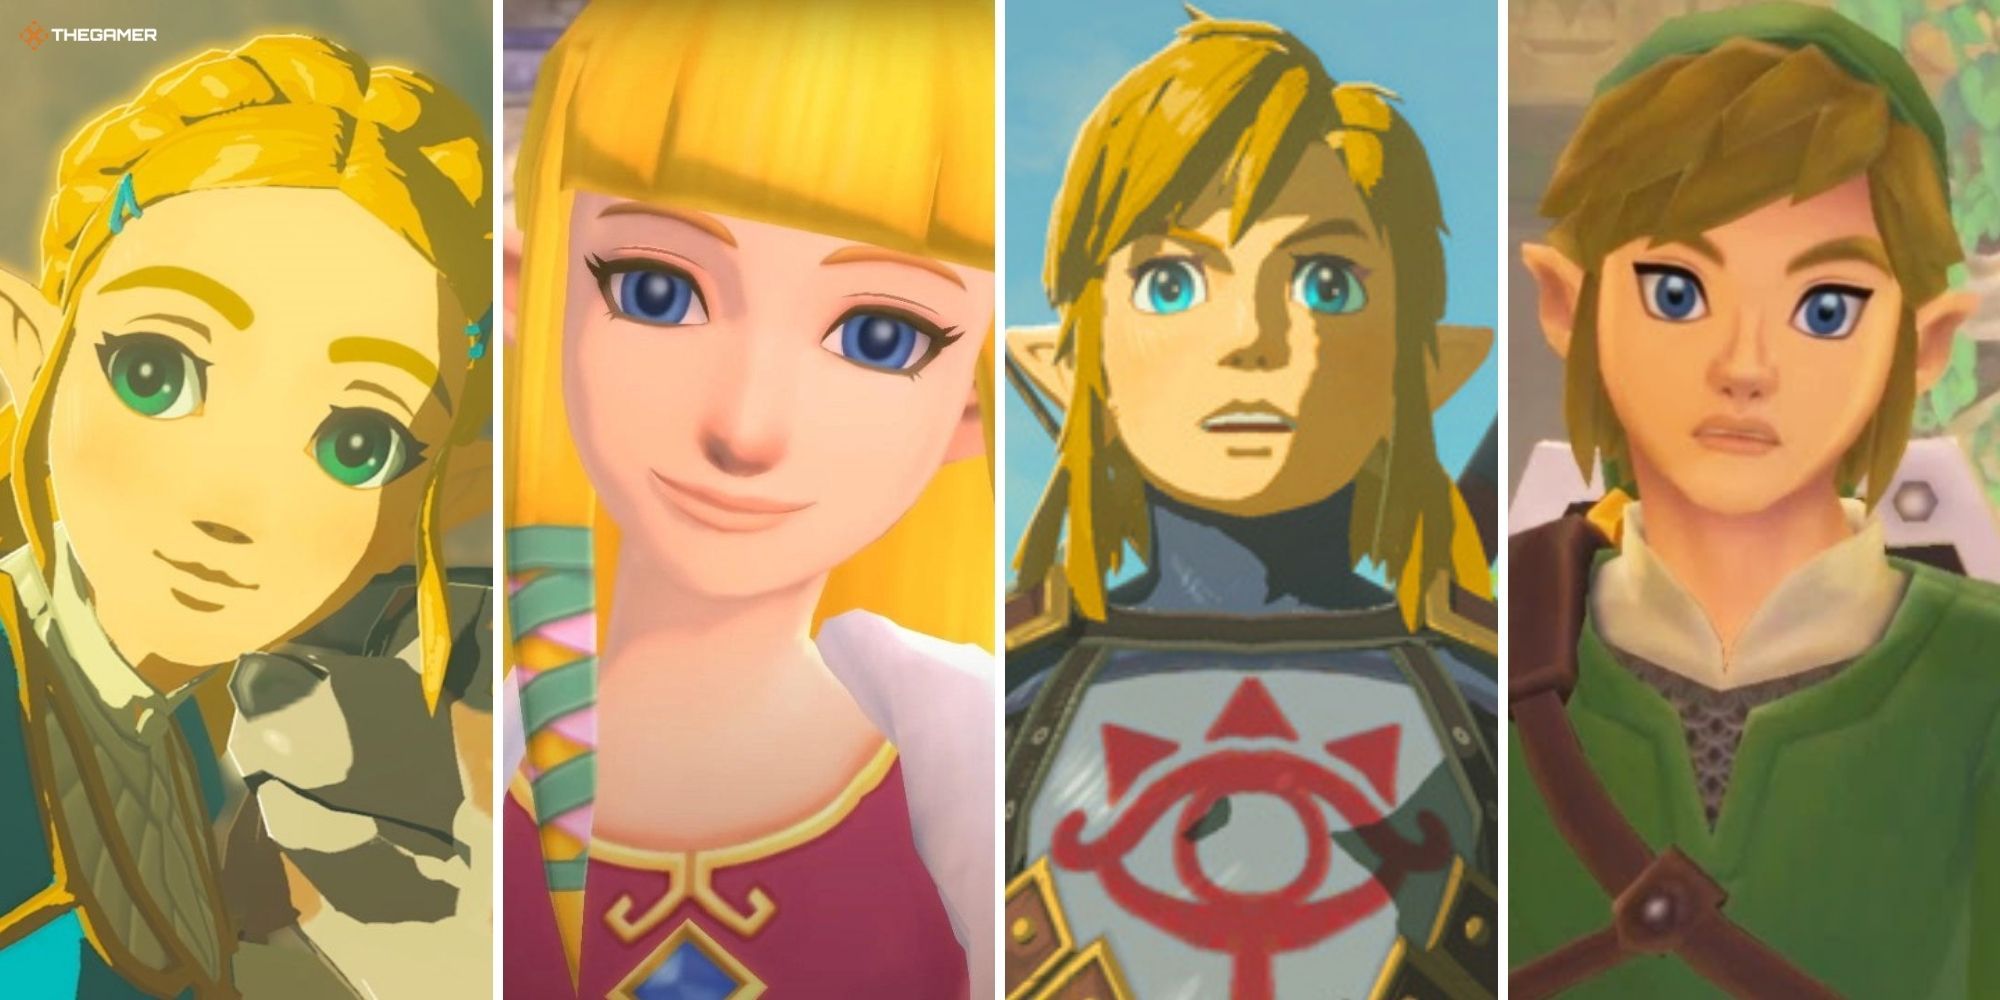 Zelda and Link from Skyward Sword and Breath of the Wild